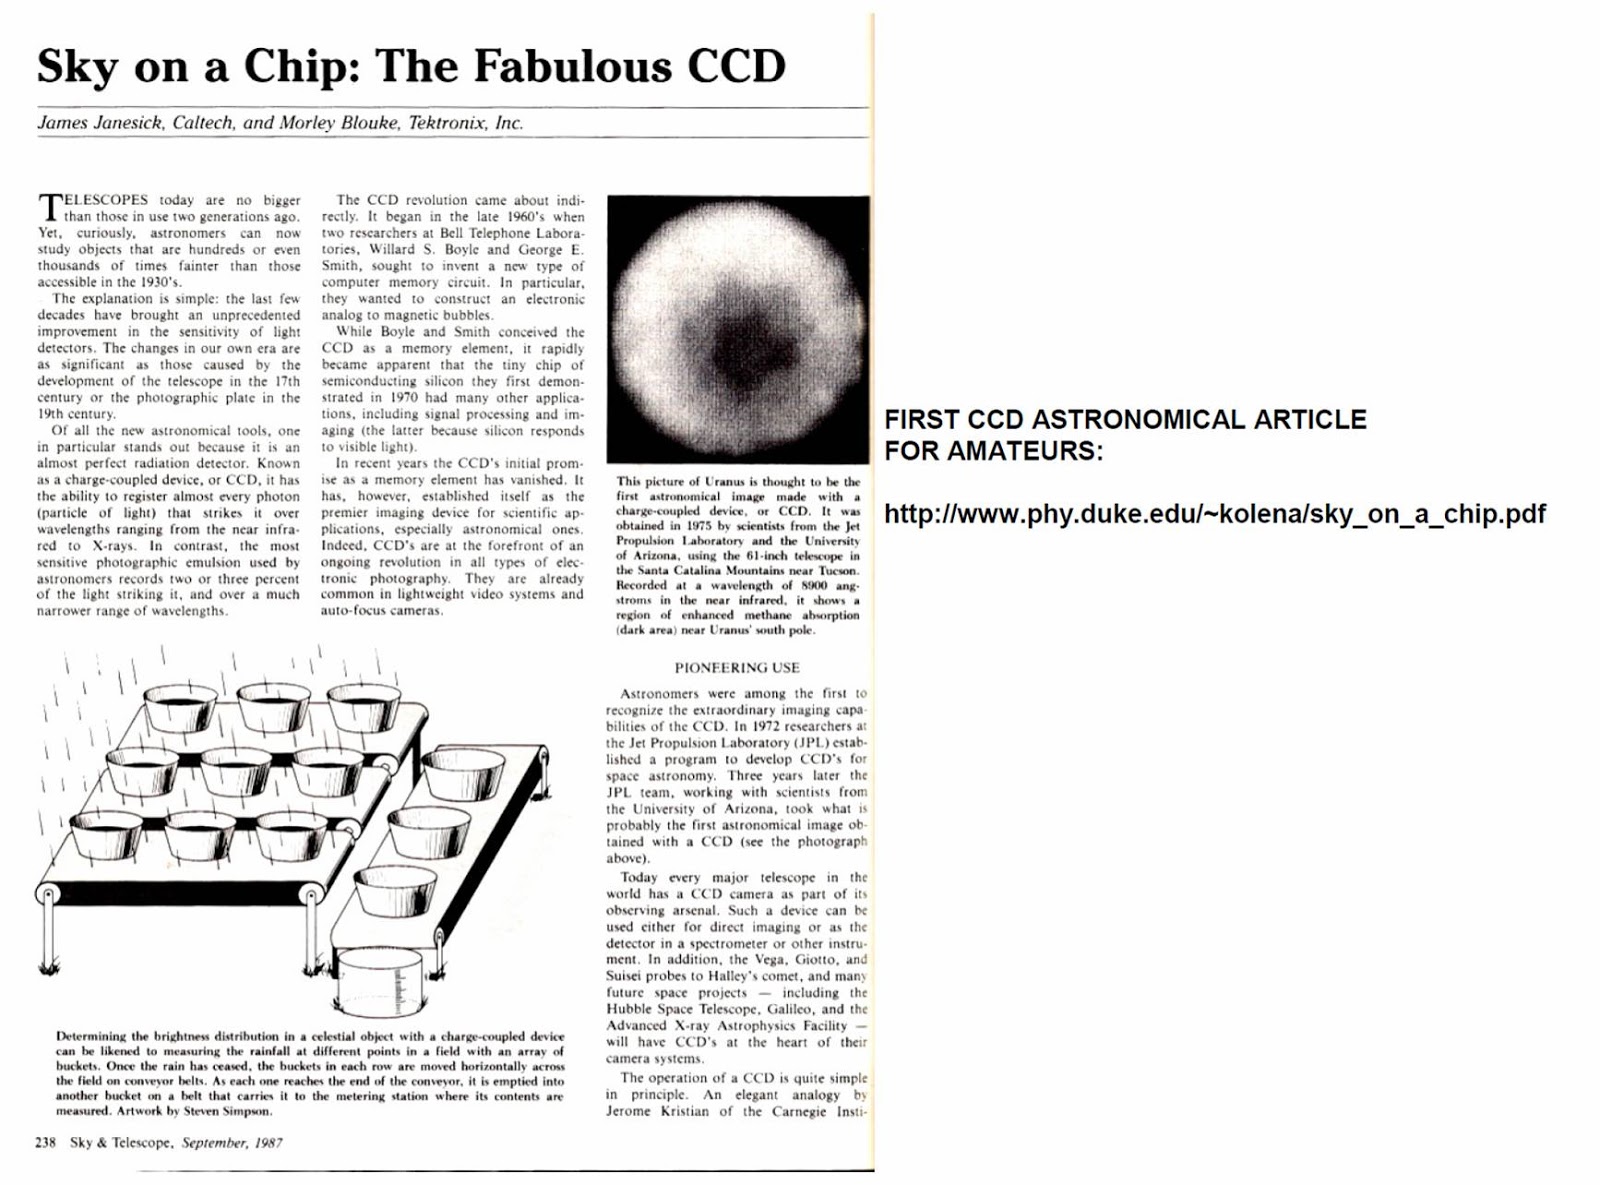 Firsat CCD astronomical article for amateurs - Shy on a Chip: The Fabulous CCD